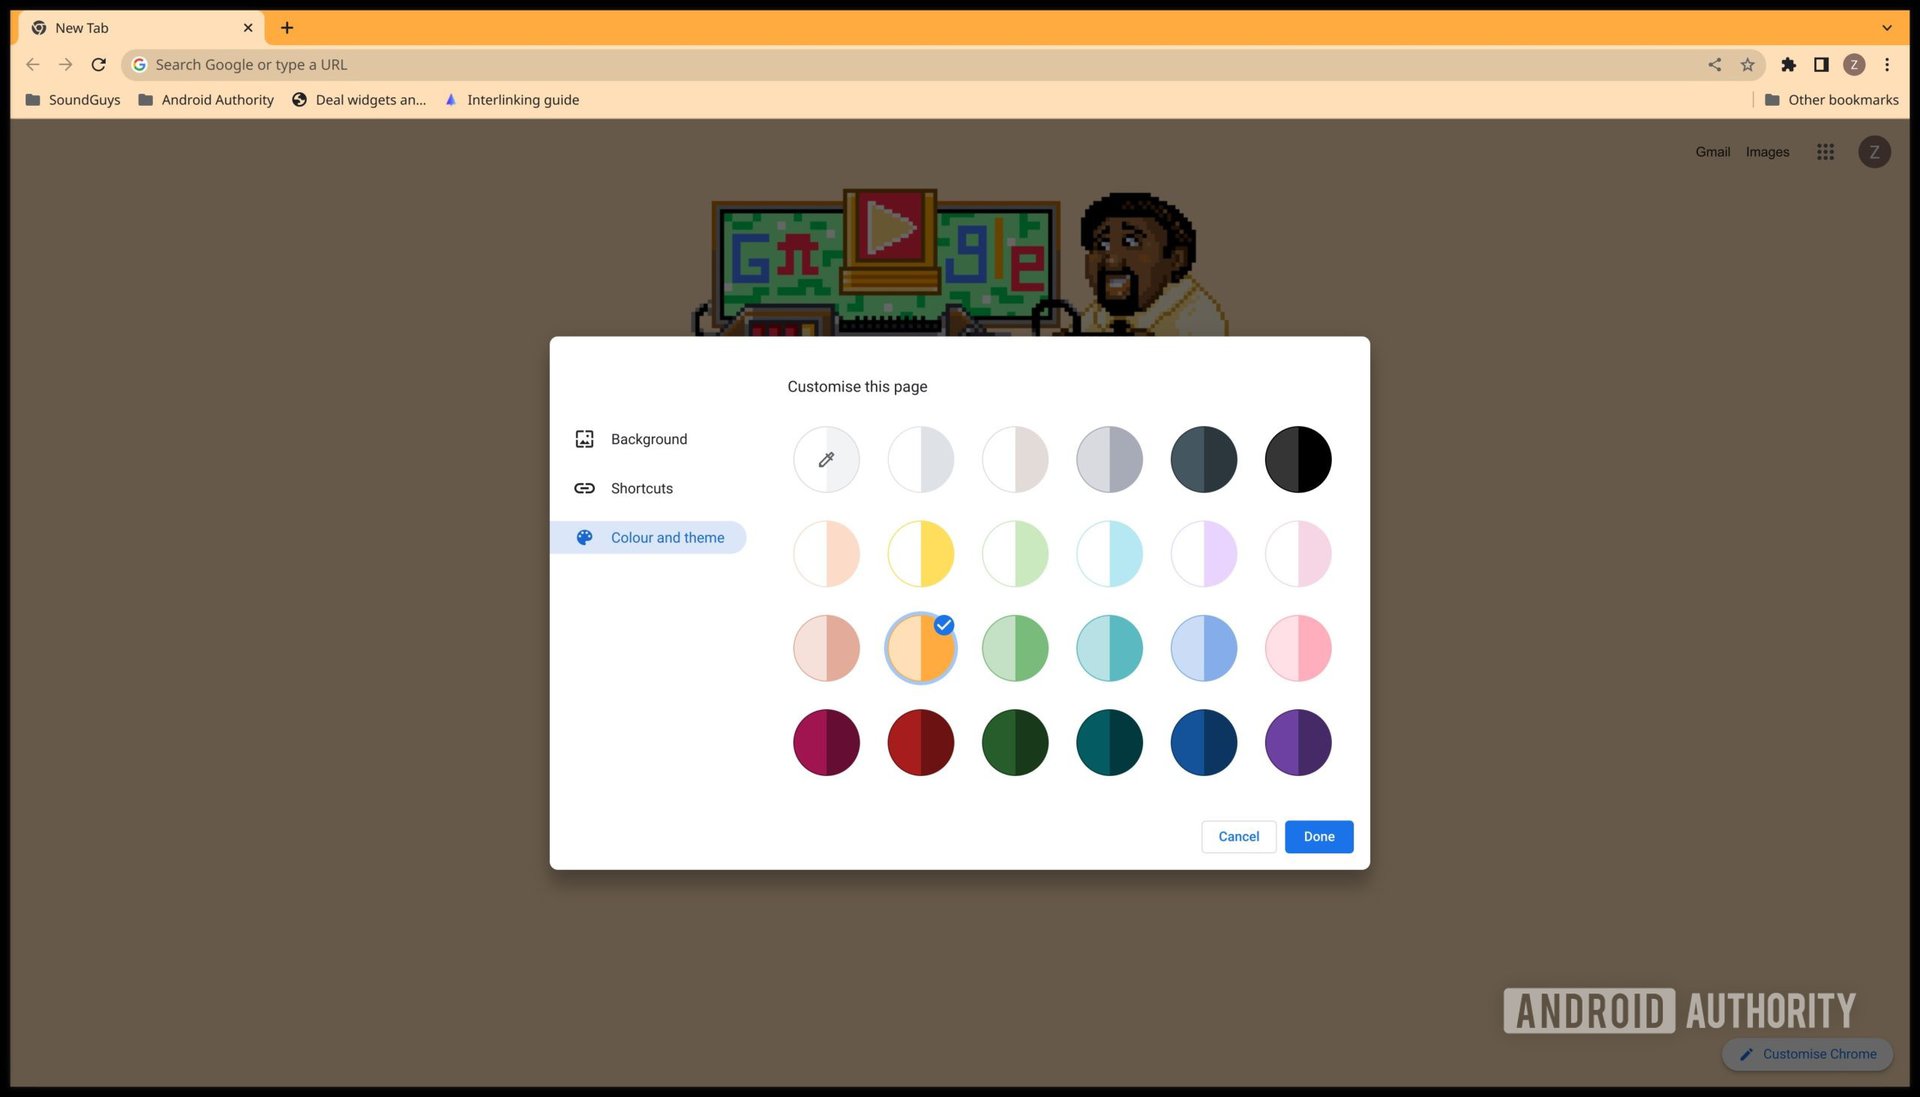 The &quot;Customize this page&quot; Google Chrome settings window showing the available color schemes under &quot;Color and theme.&quot;